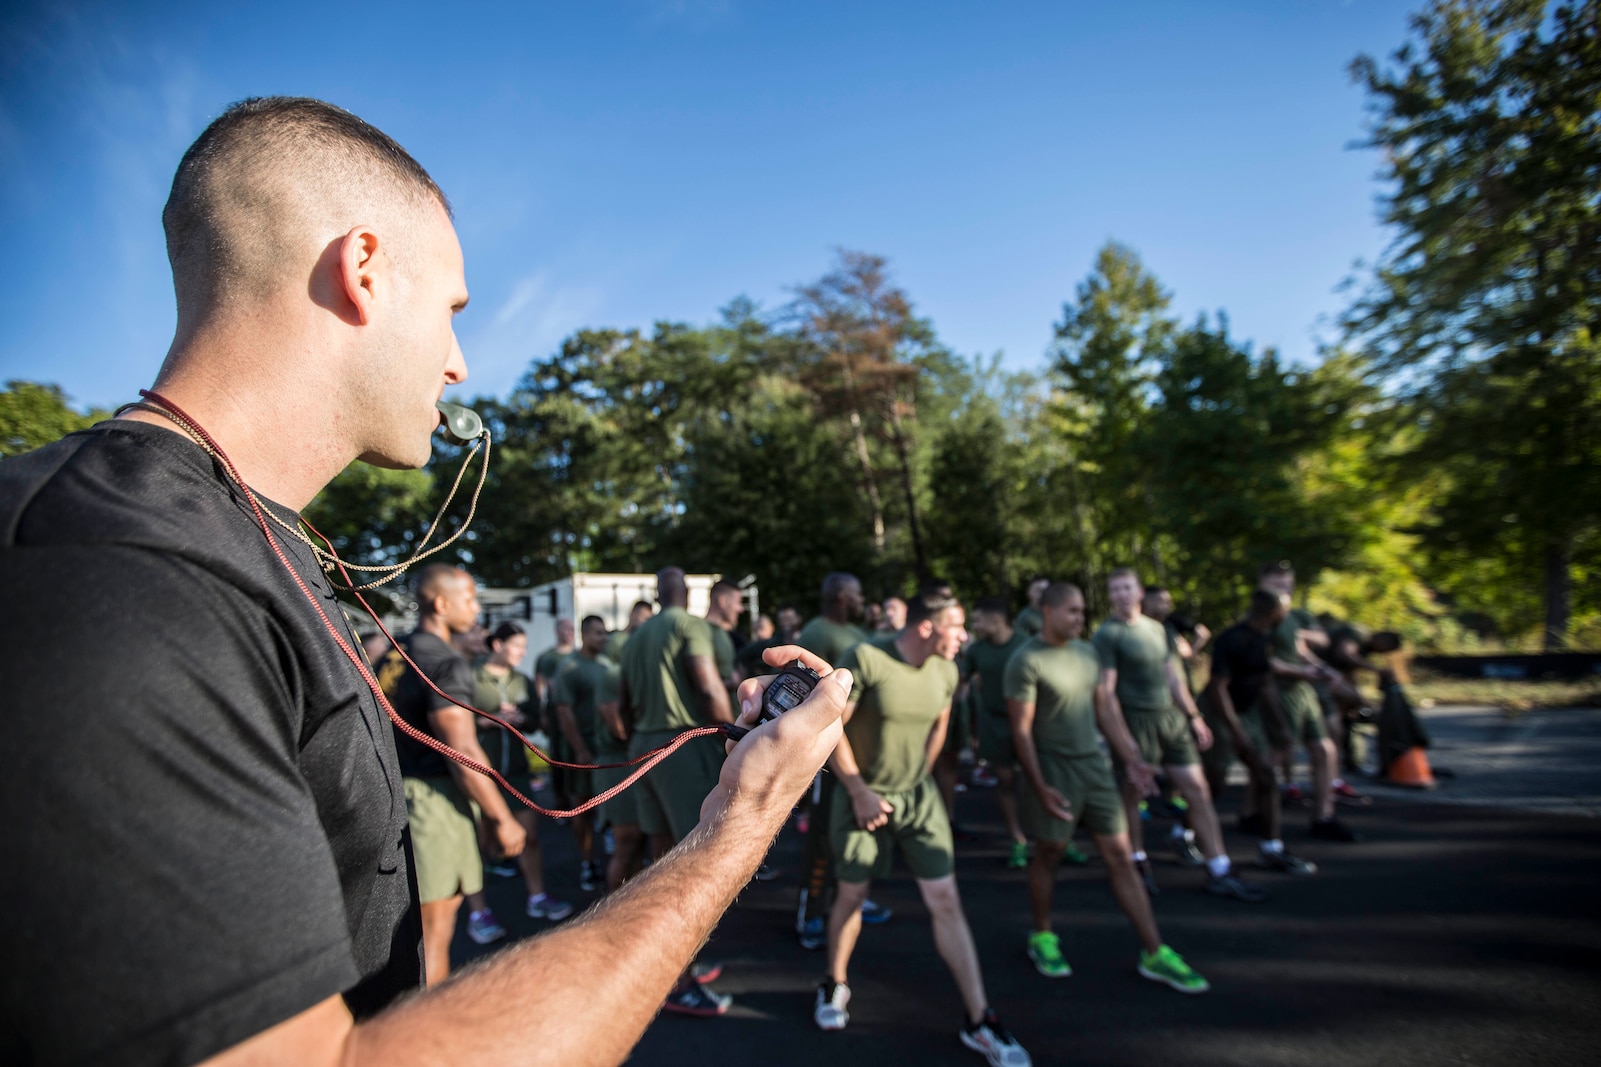 U.S. Marines attend the first Force Fitness Instructor Course aboard Marine Corps Base Quantico, VA., Oct. 13, 2016. The course is designed to produce Fitness Instructors to return to the fleet and maintain health and wellness while improving human performance. (U.S. Marine Corps photo by Sgt. Melissa Marnell) 